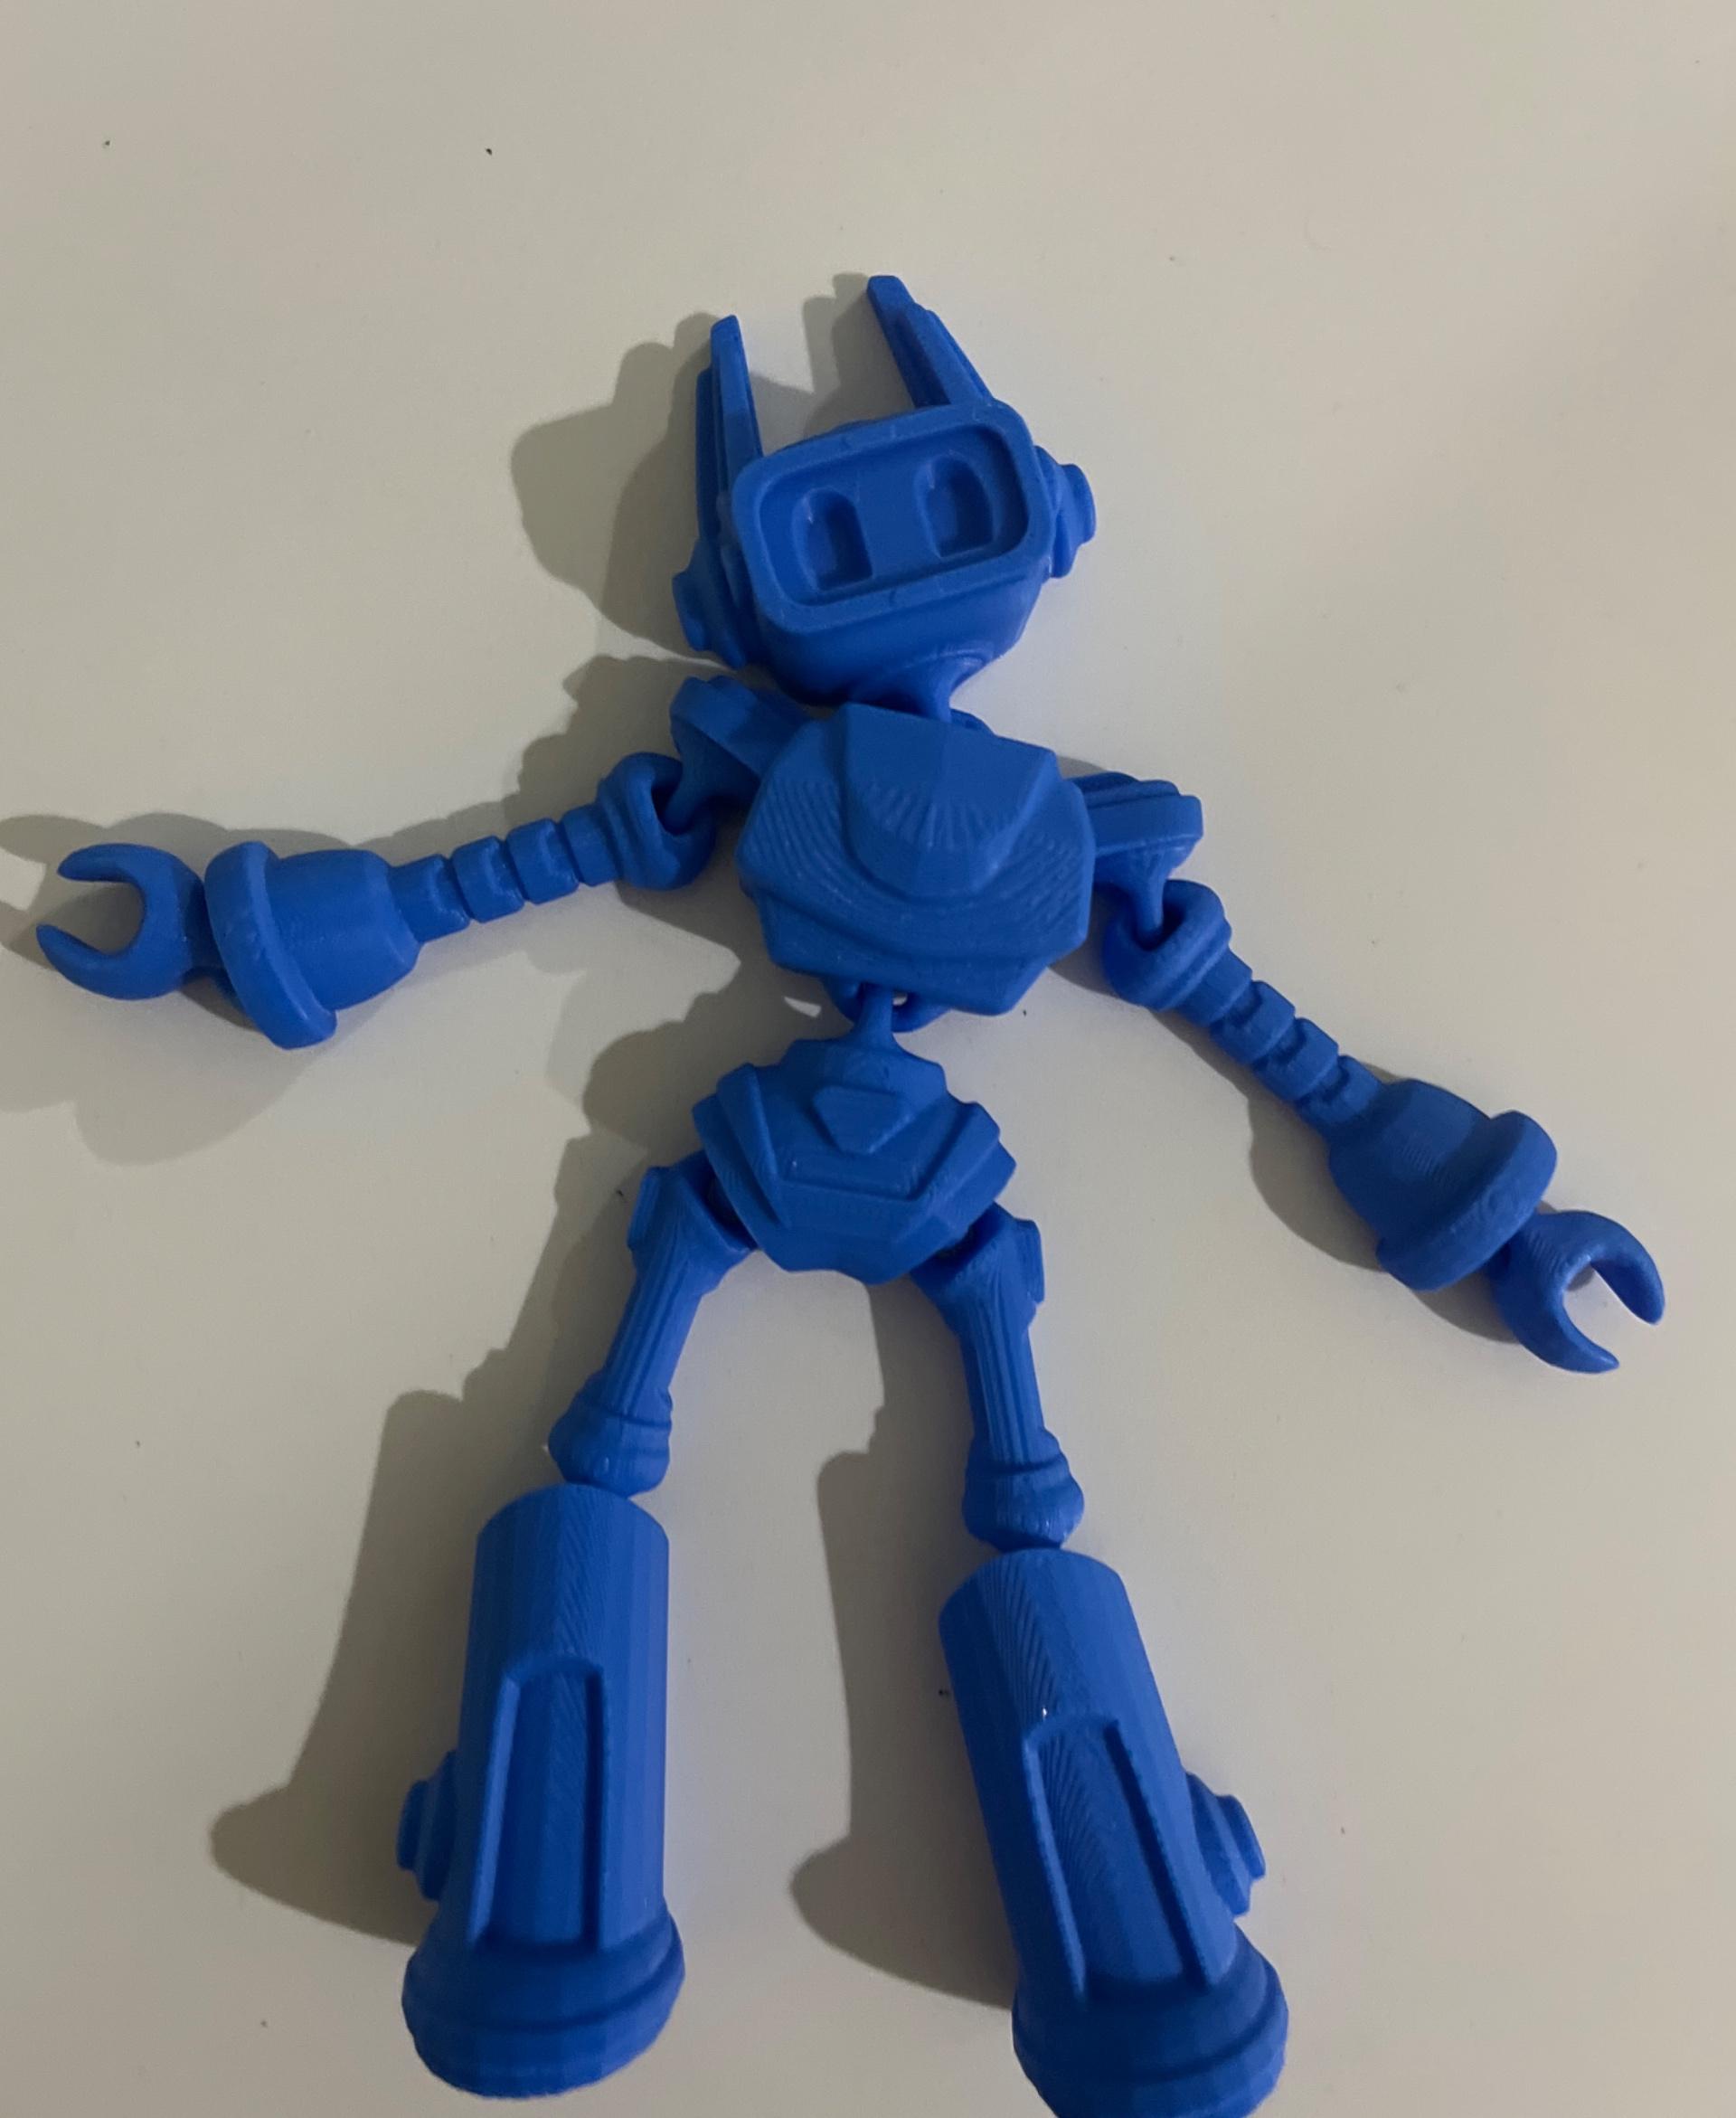 ZILLOLAAB - ZIPPY THE BOT 🤖 - 
Worked amazing, my best articulated print yet! 

Printed on Bambu labs a1 mini, with blue mika3d PLA

35% infill 
 - 3d model